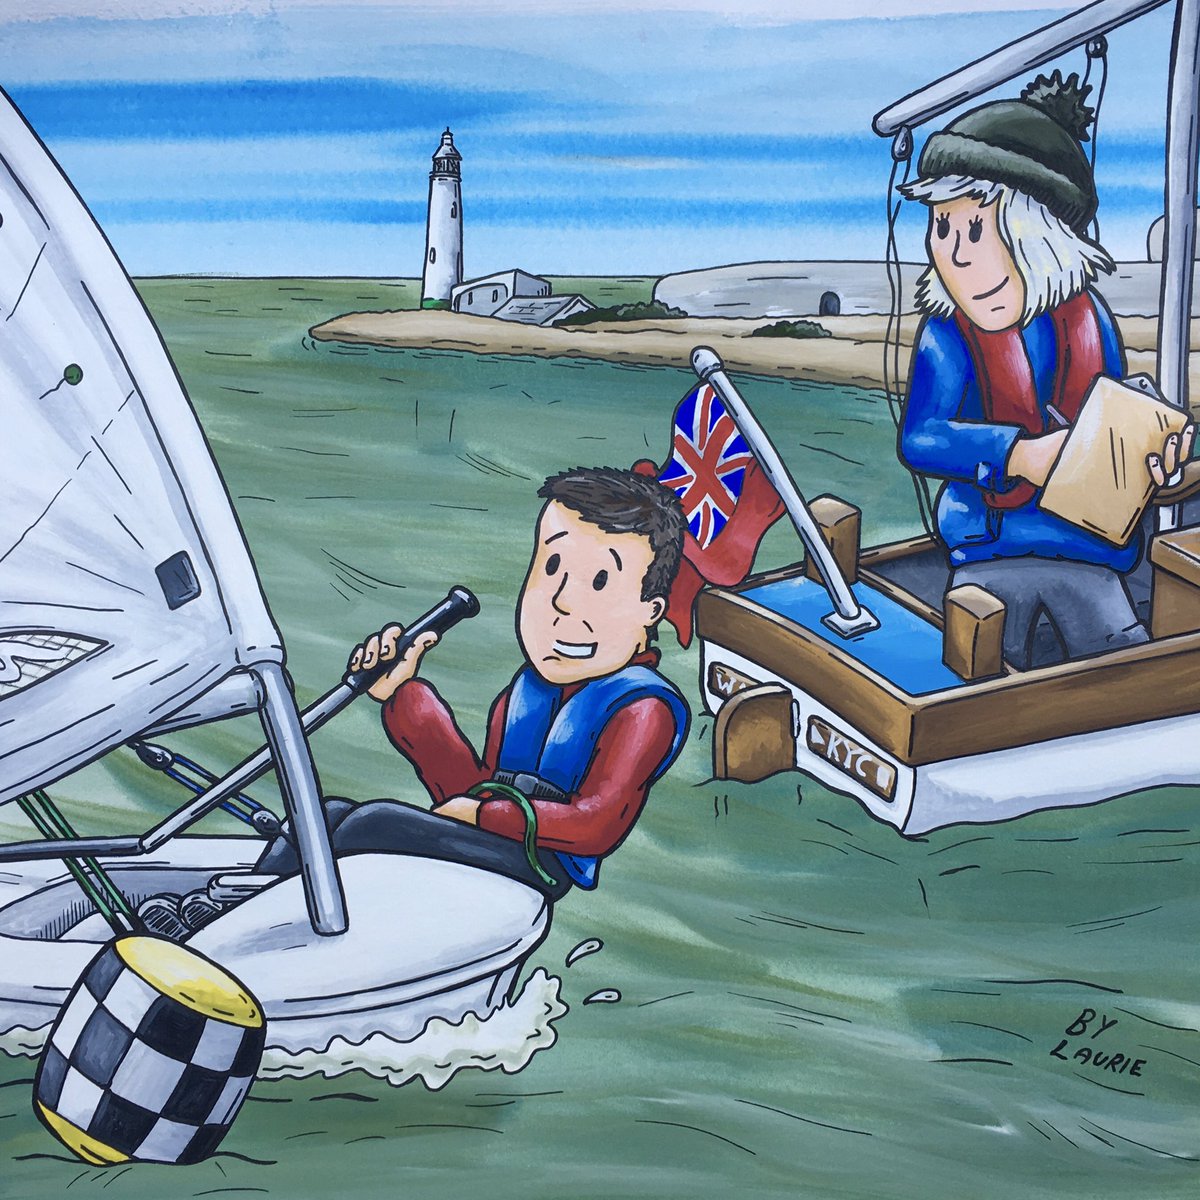 Here’s that finished commission!
.
#bylauriedesigns #gouache #artwork #painting #art #commissionedart #gouachepainting #yachtingart #yachtingartist #sailing #sailingart #sailingartwork #dinghysailing #sailingdinghy #thesolent #keyhaven #hurstcastle #hurstspit